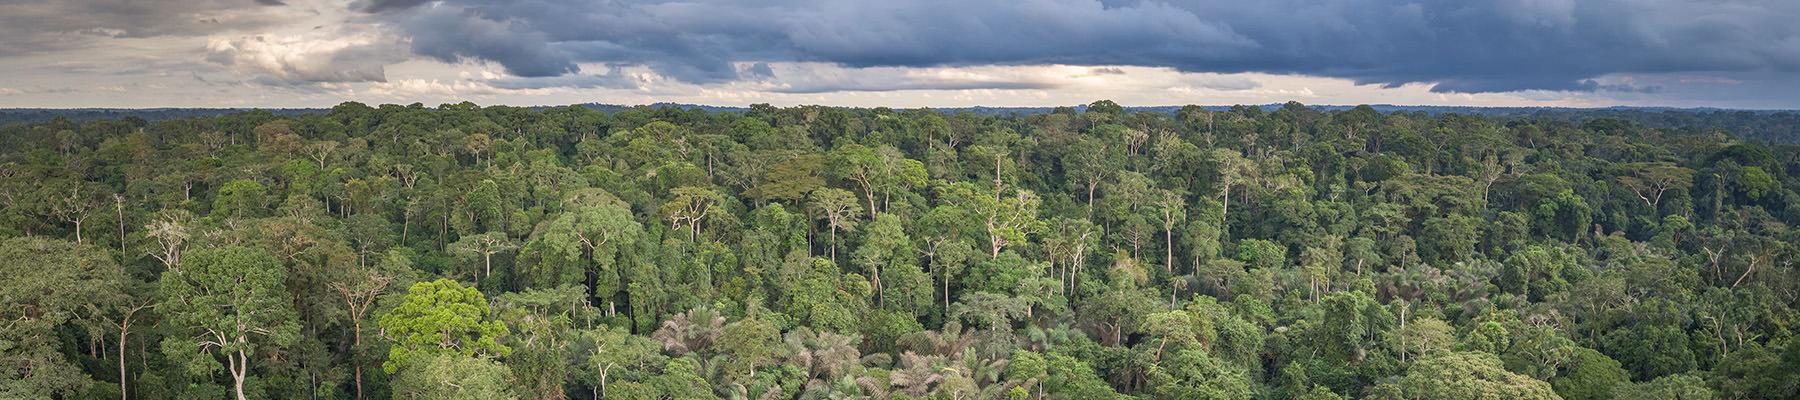 Tropical forest in Dja National Park, Cameroon © A.Walmsley / TRAFFIC